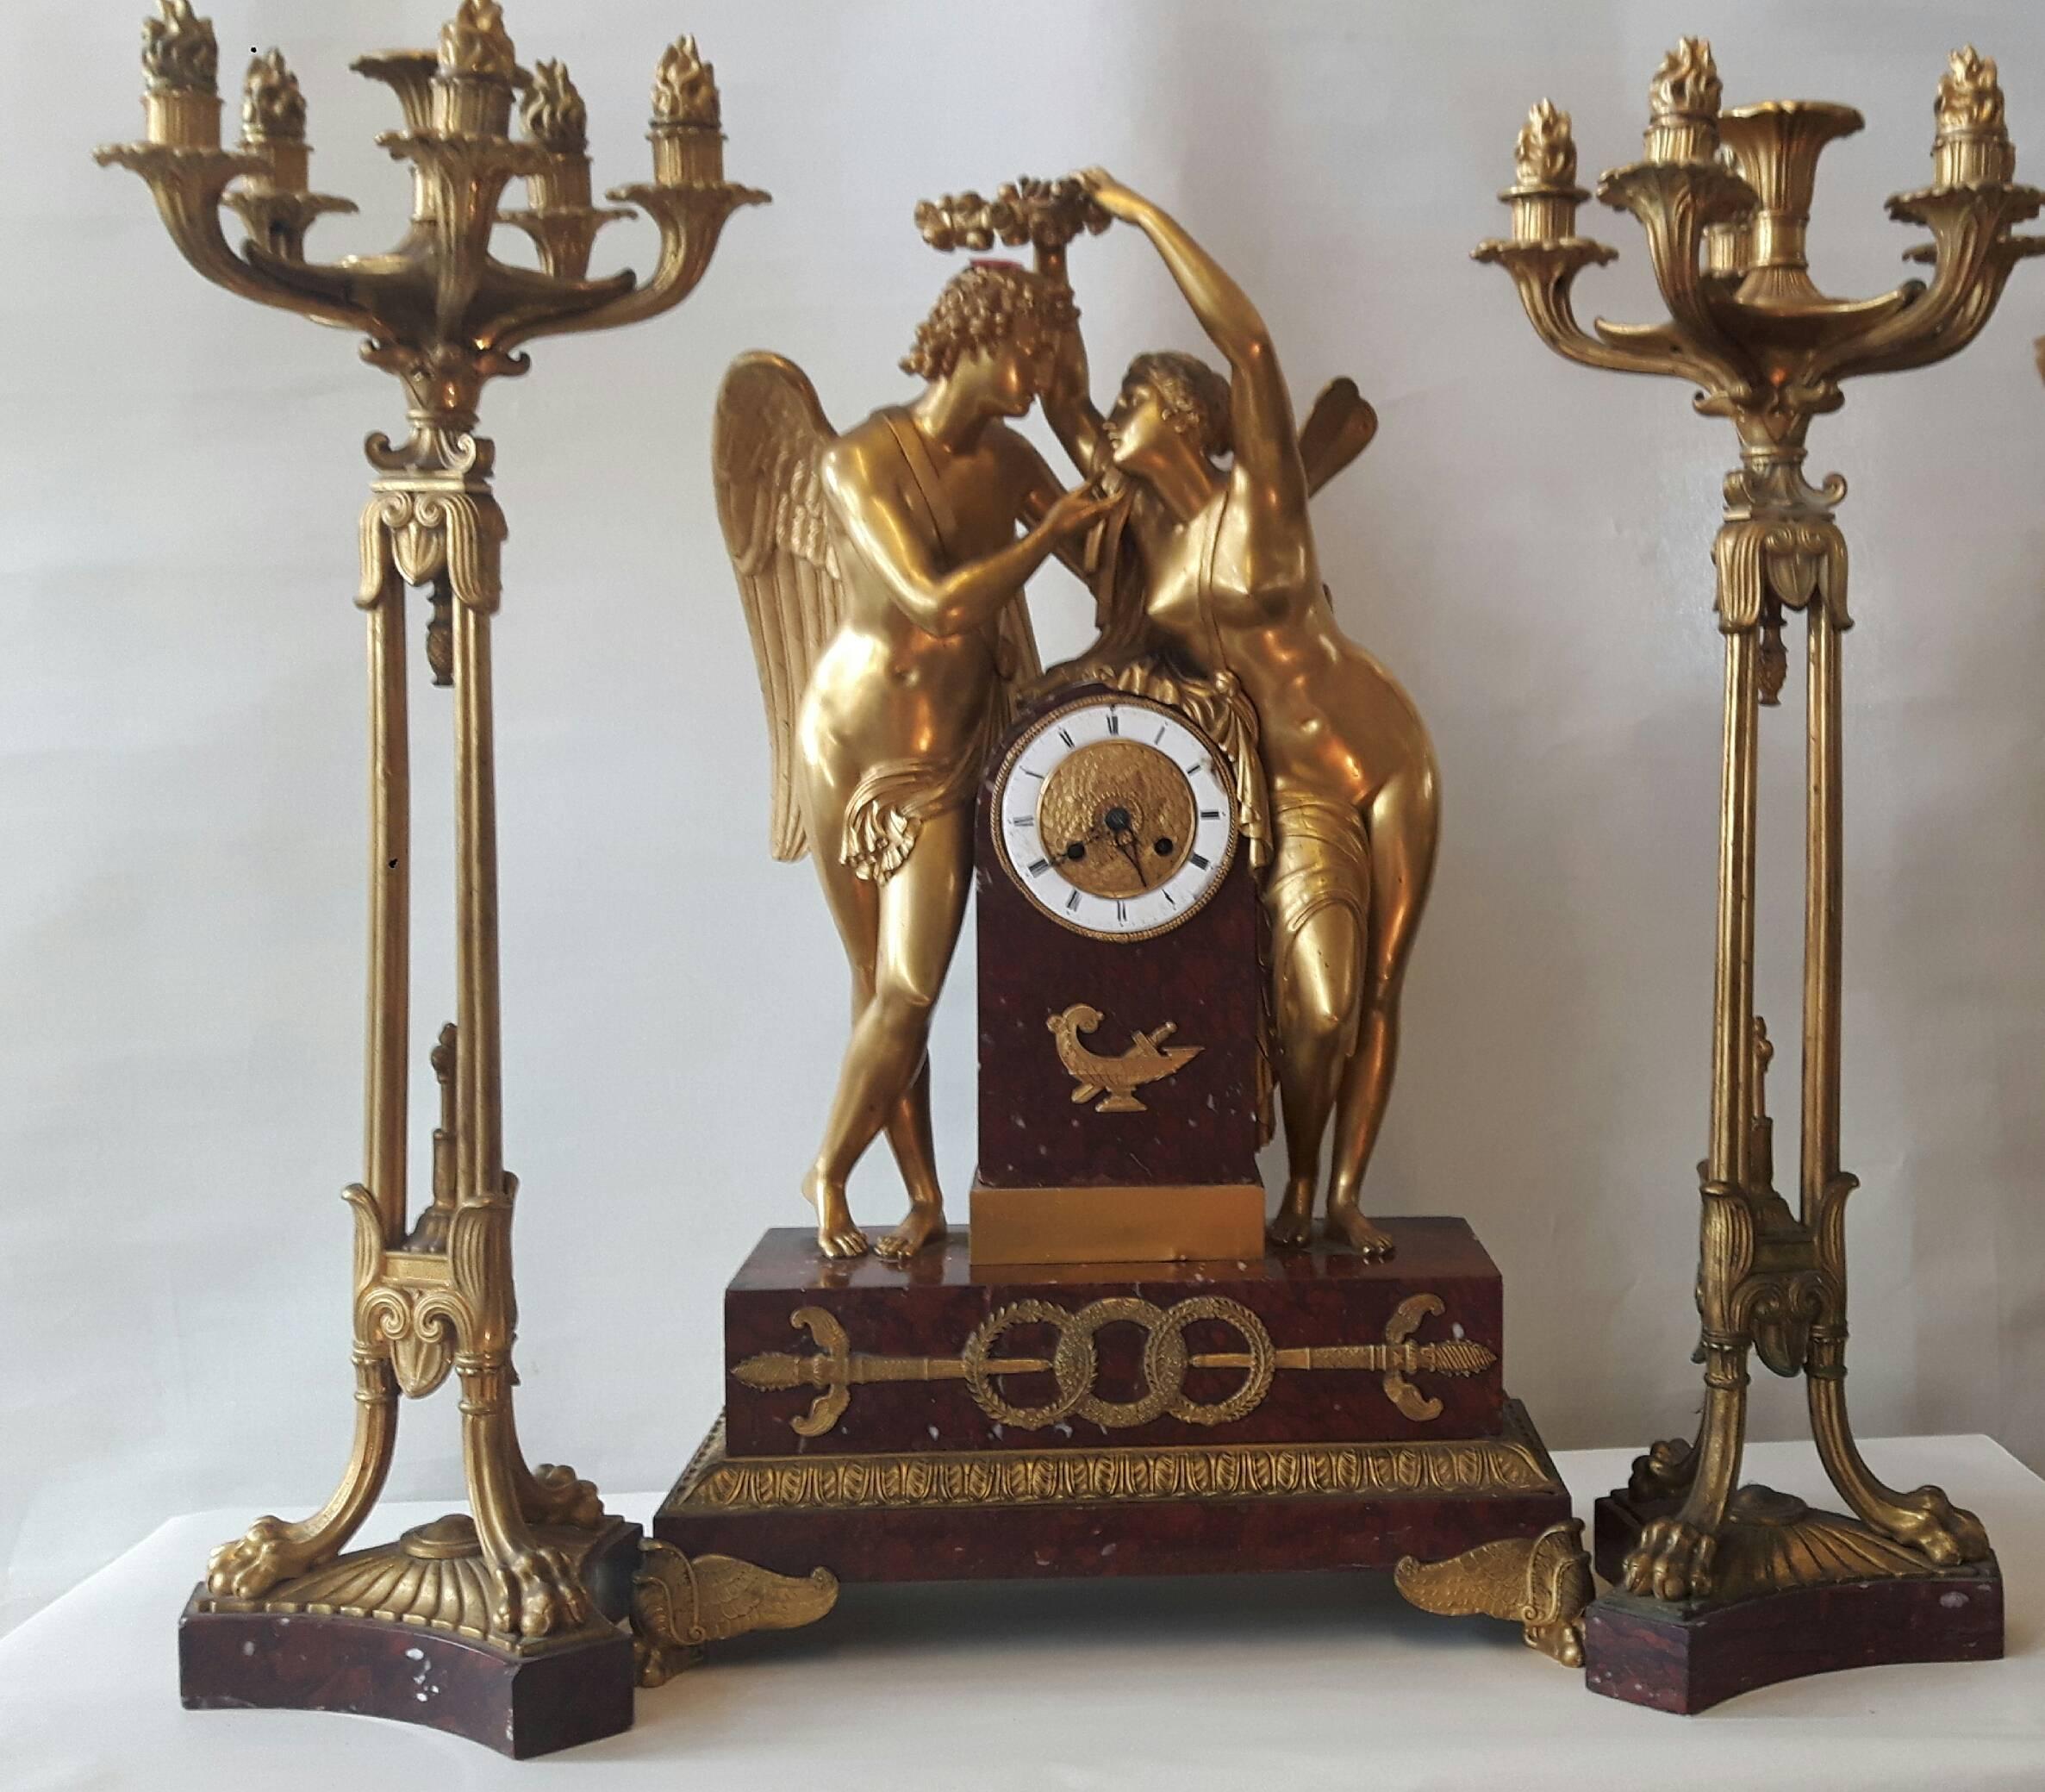 A wonderful garniture in marble and ormolu, the central clock face engraved in ormolu and surrounded by enameled numerals. The clock is adorned by two amorous ormolu figures of an angel and a nymph and the body is decorated with Roman designs in the